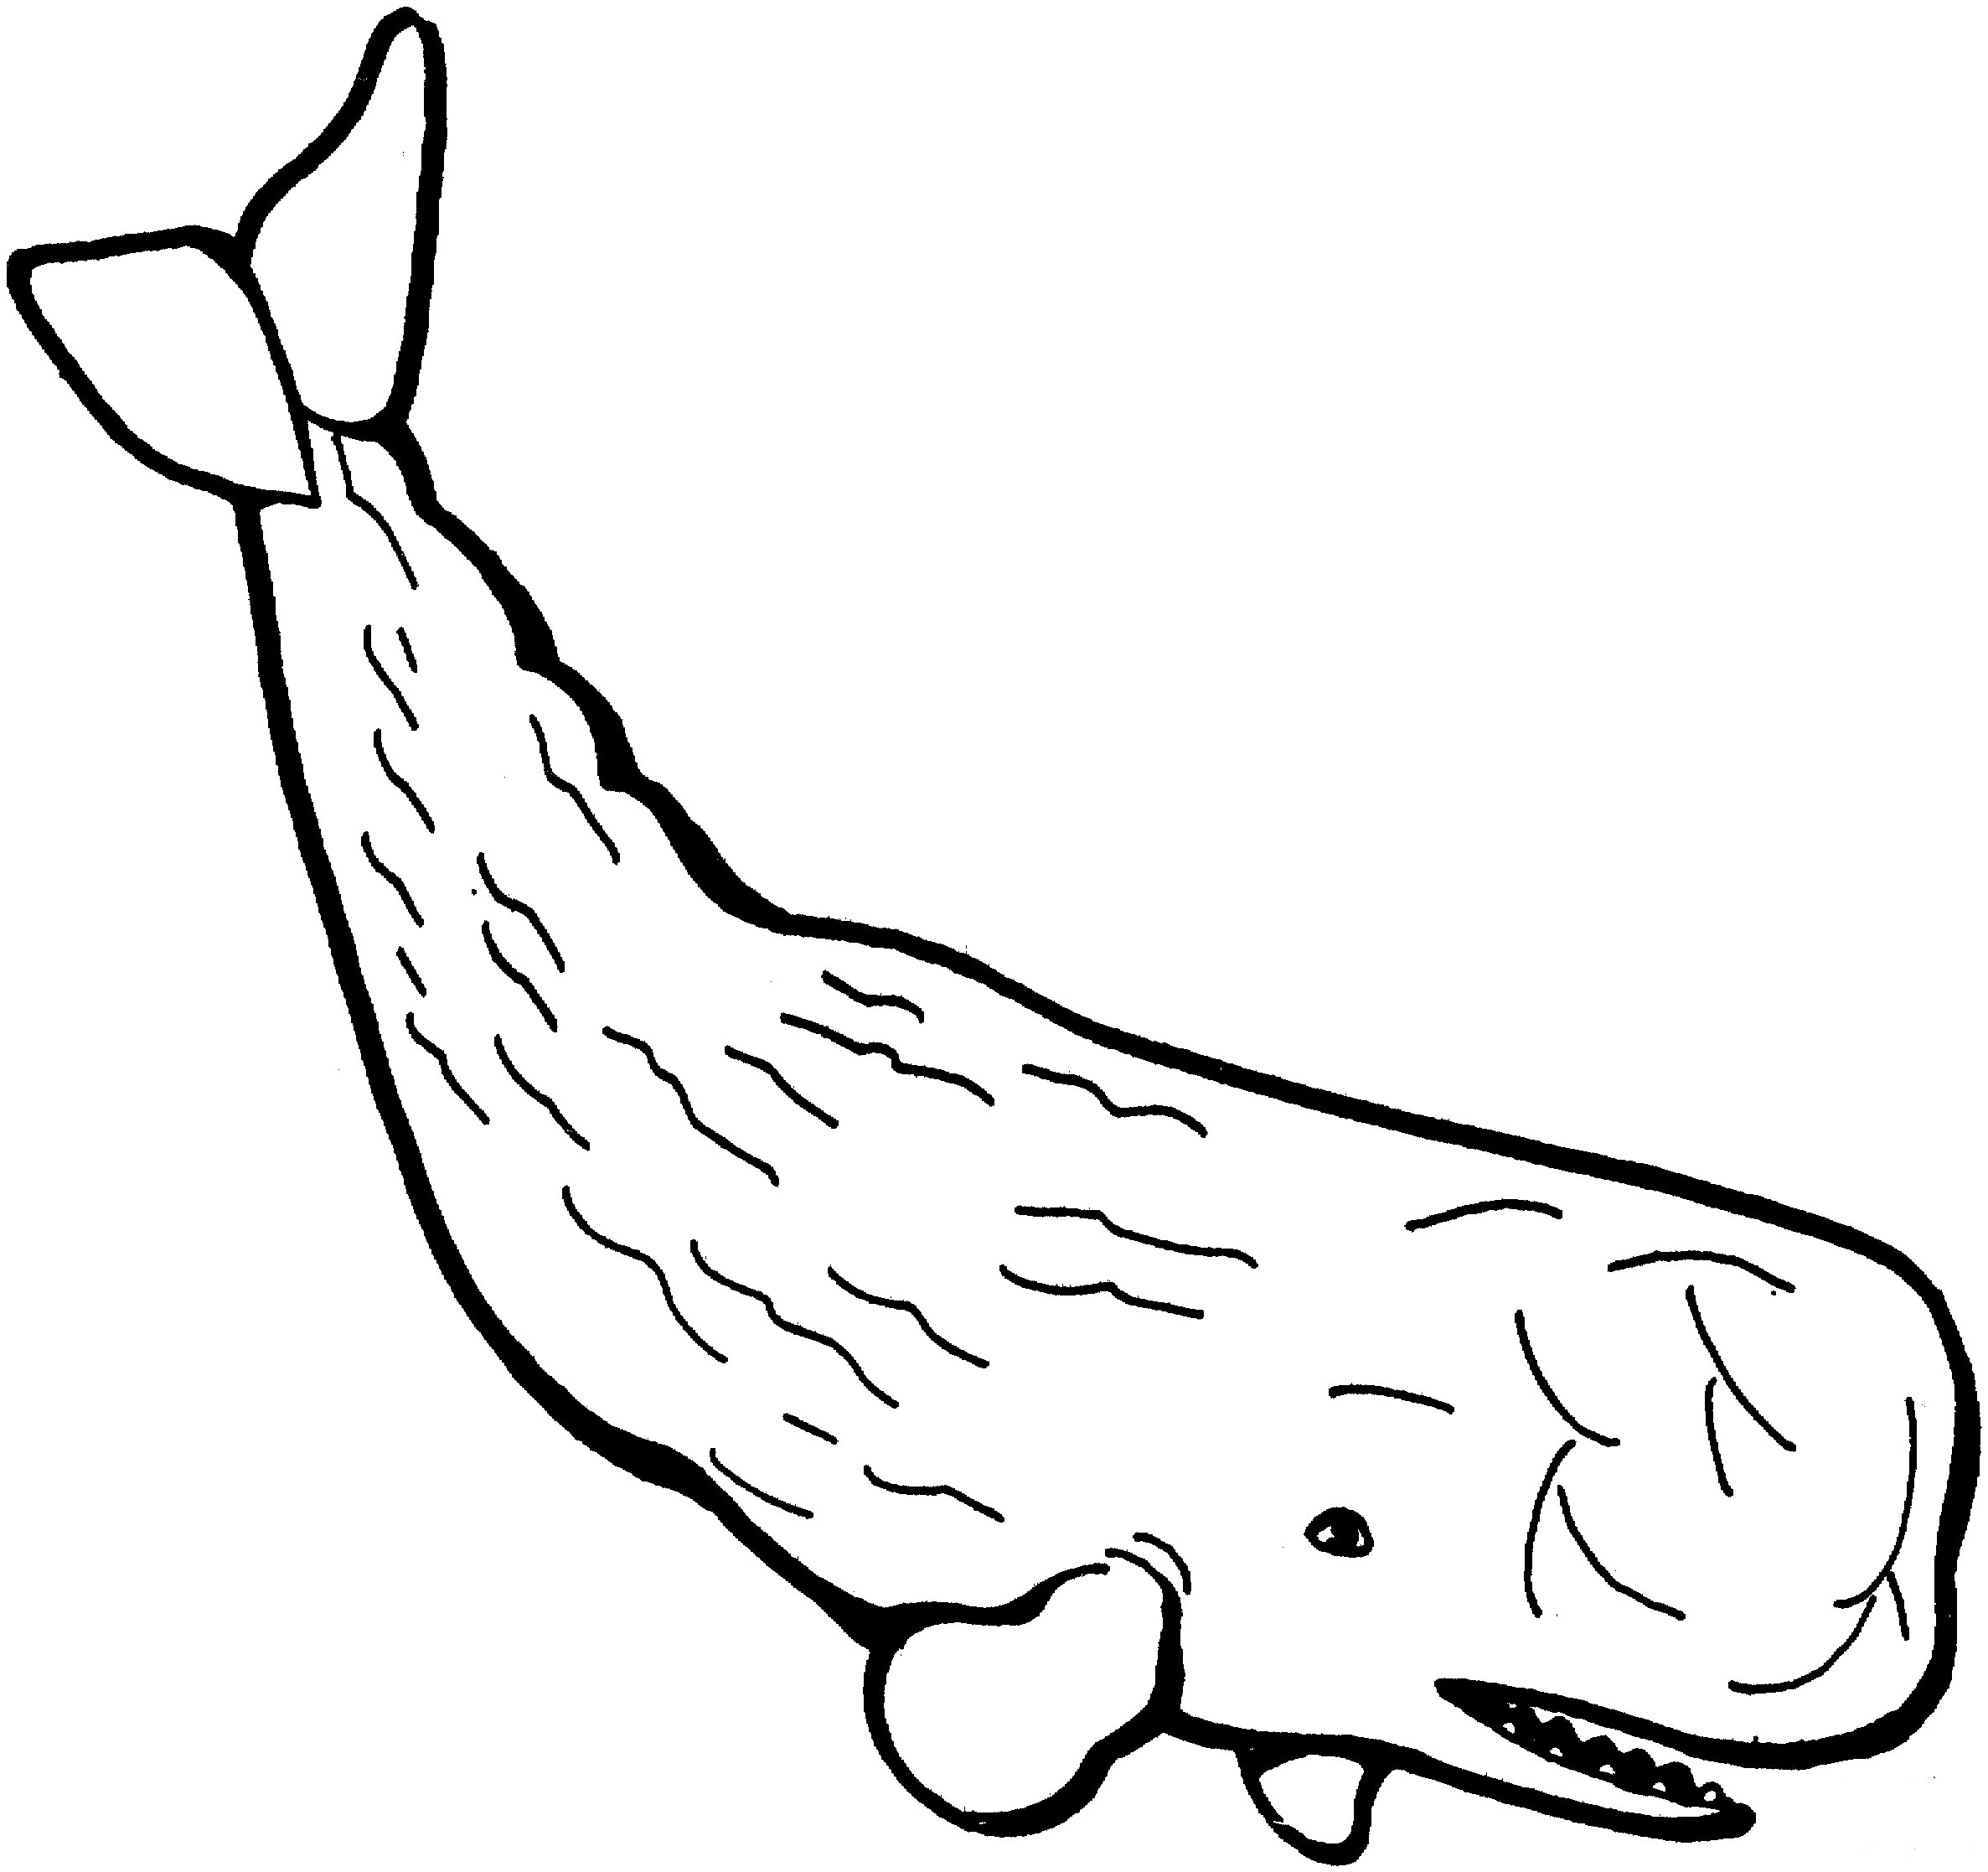 Sperm Whale With Scars Coloring Page